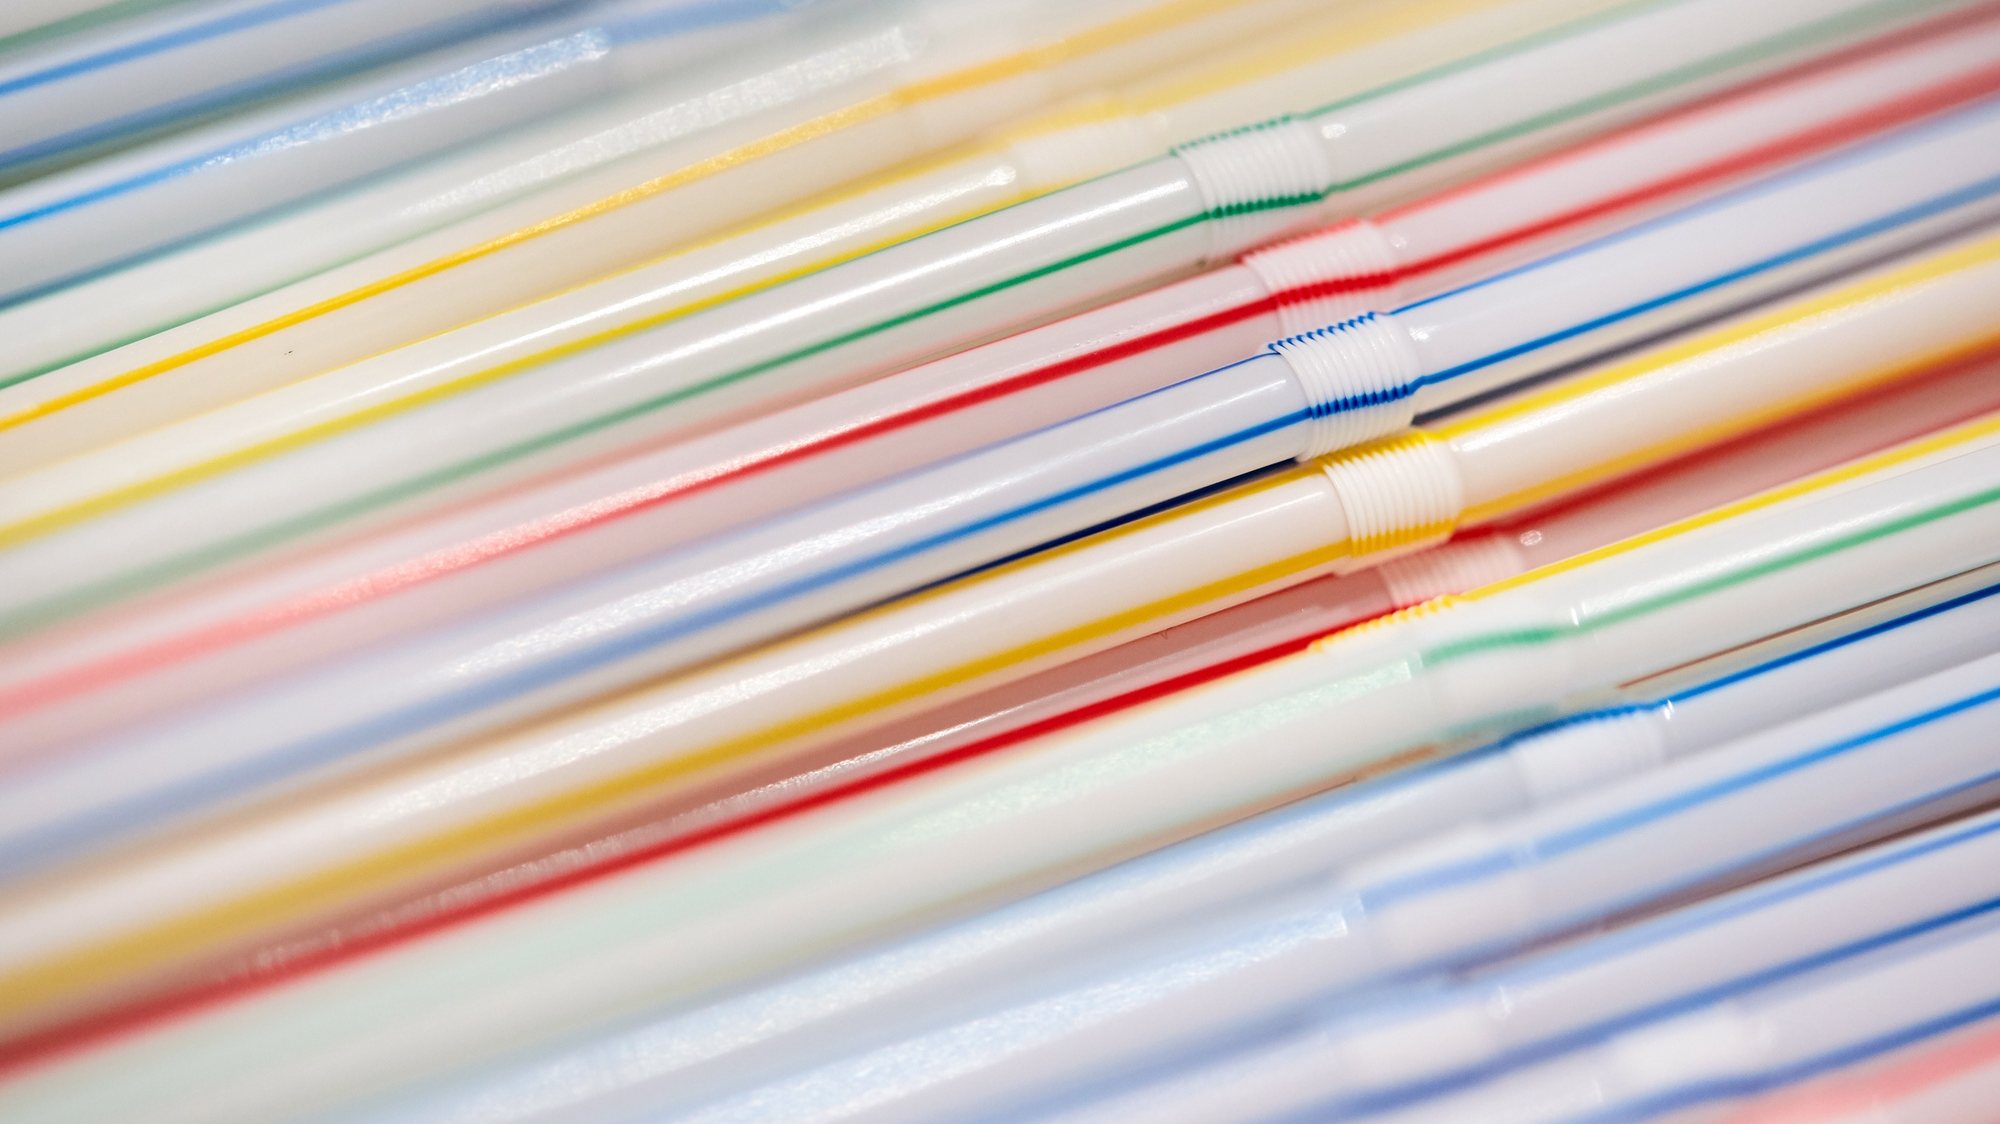 epa06769568 A close-up of plastic straws in Berlin, Germany, 28 May 2018. The EU Commission presented its Plastics Strategy on 28 May 2018 to ban single-use products, like plastic utensils, straws, coffee stirrers and cotton swabs, in the fight against plastic waste which is a main source of environmental pollution because they are used only once, hard to collect for recycling and can kill animals, fish and sea turtles when they swallow plastic straw.  EPA/HAYOUNG JEON